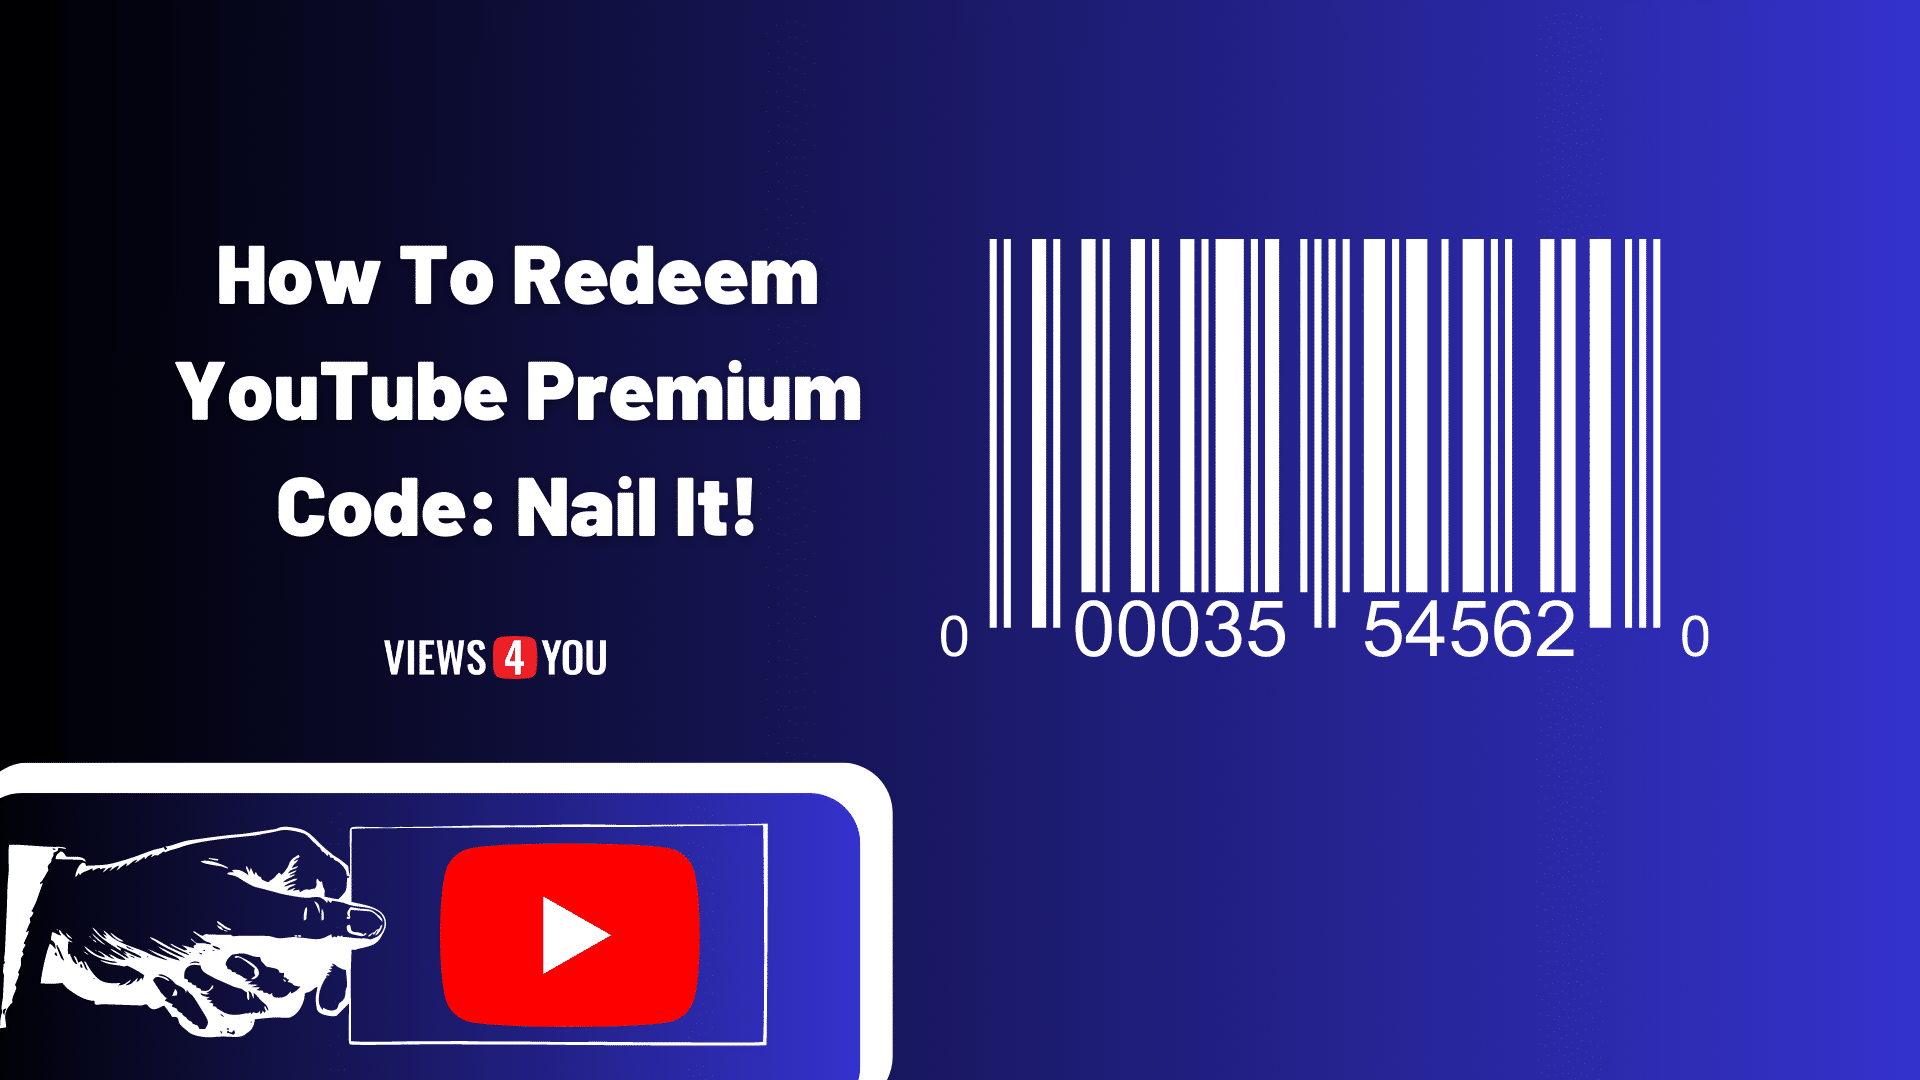 How to redeem YouTube premium code and learn how to nail this.